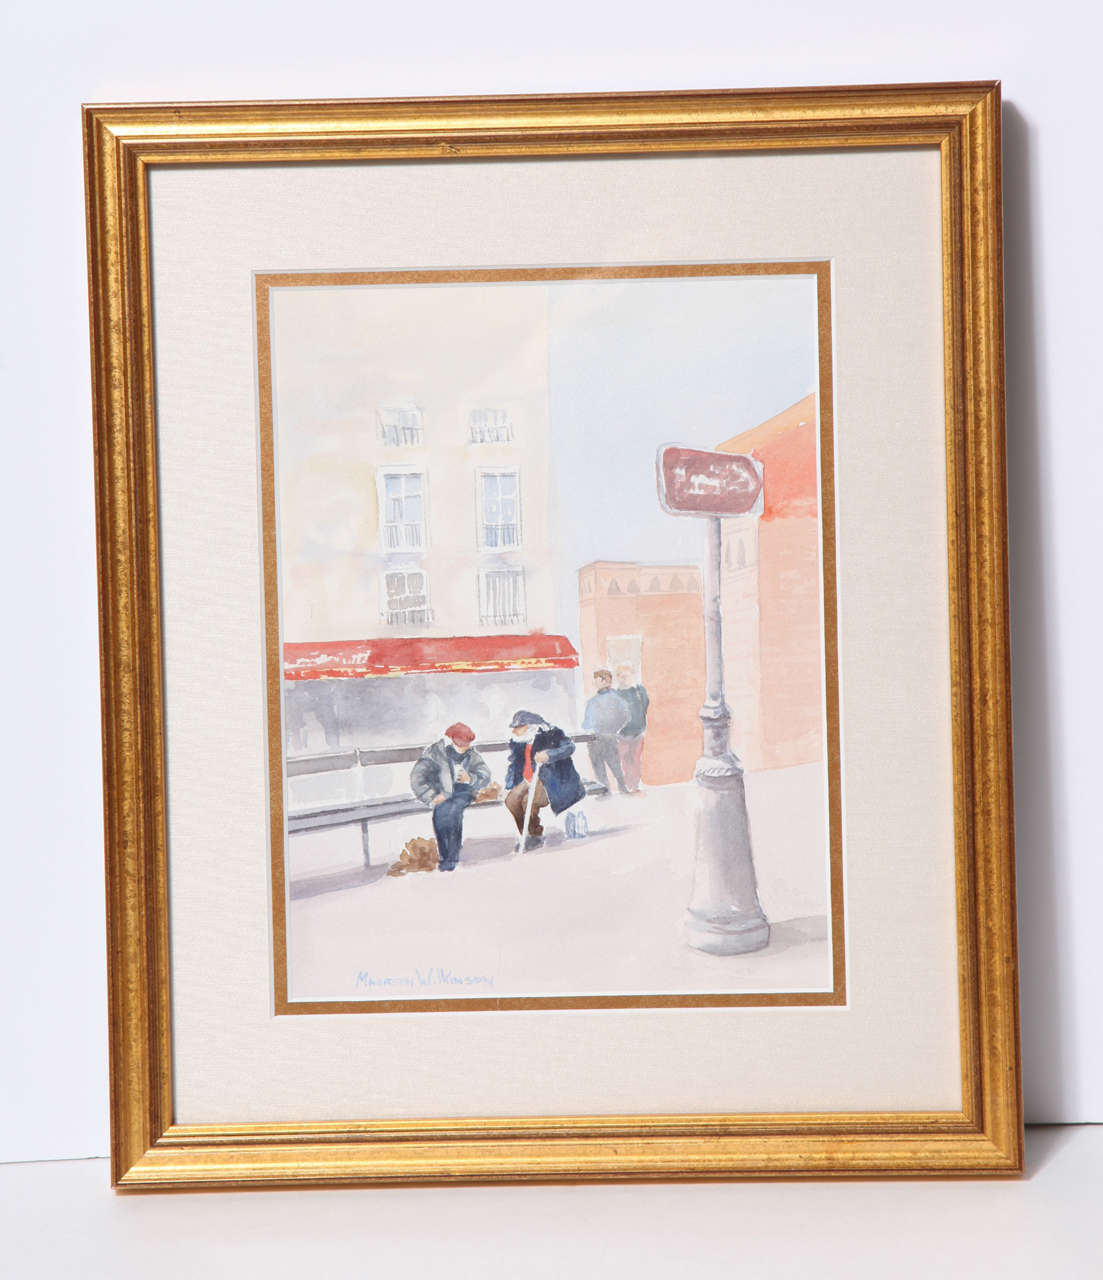 Beautiful water color painting by Maureen Wilkenson, CT.
Street life in Paris, circa 1960. New frame.